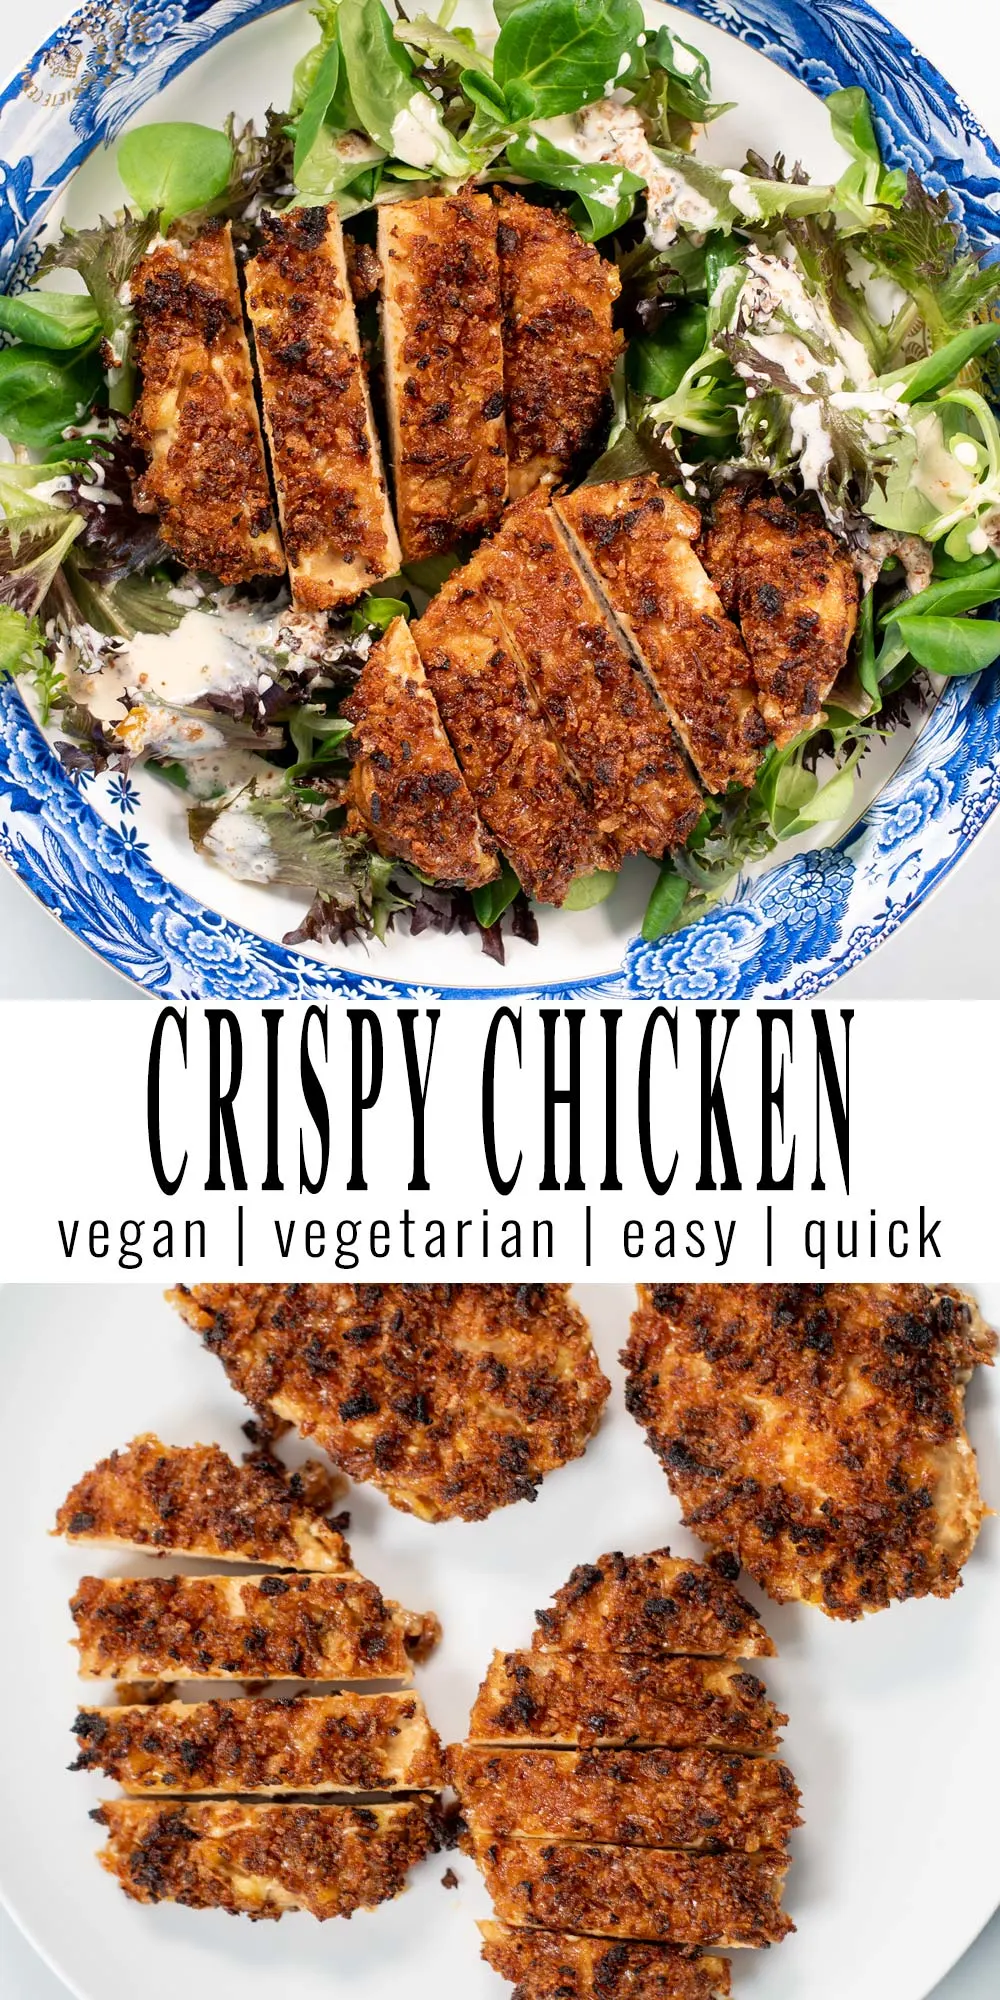 Collage of two photos of Crispy Chicken with recipe title text.